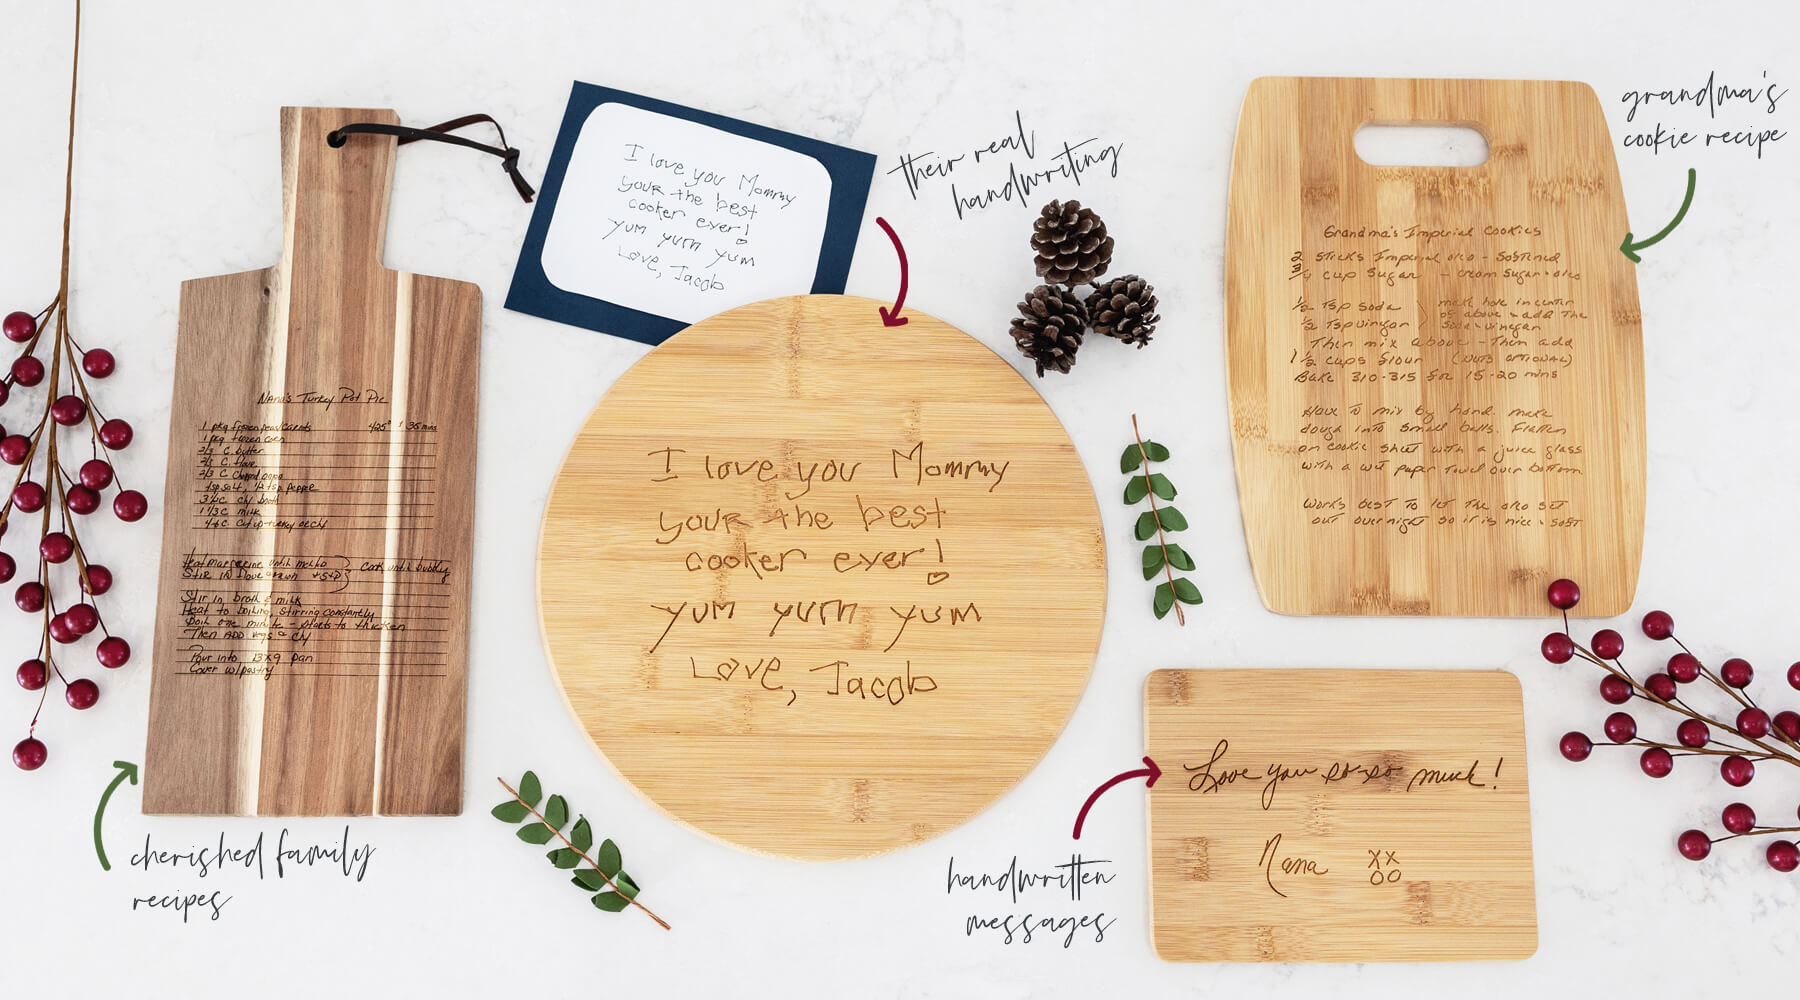 Four wooden cutting boards engraved with handwritten messages or recipes.